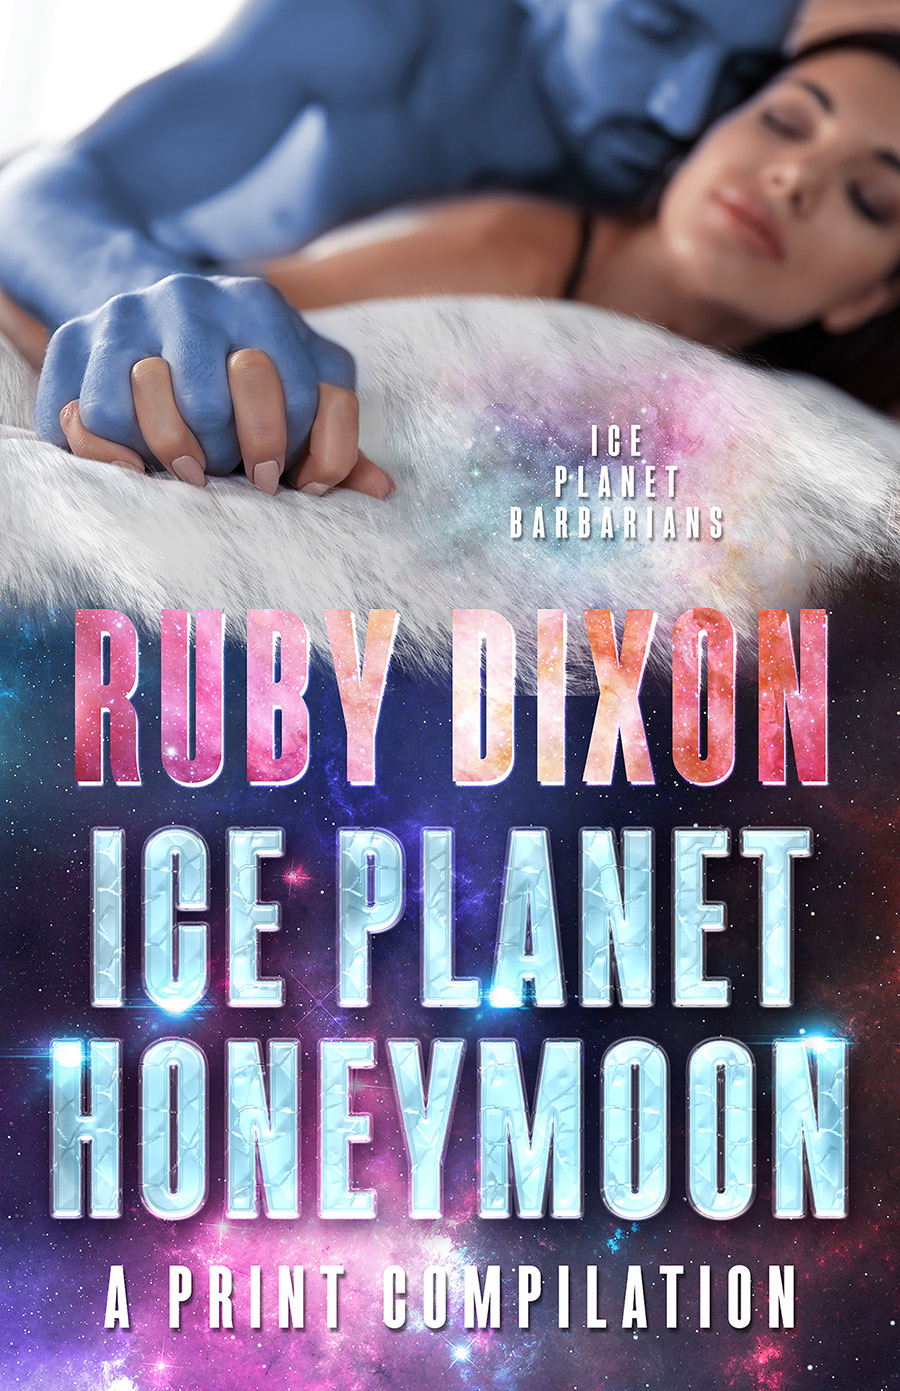 Ice Planet Honeymoon – The Collection